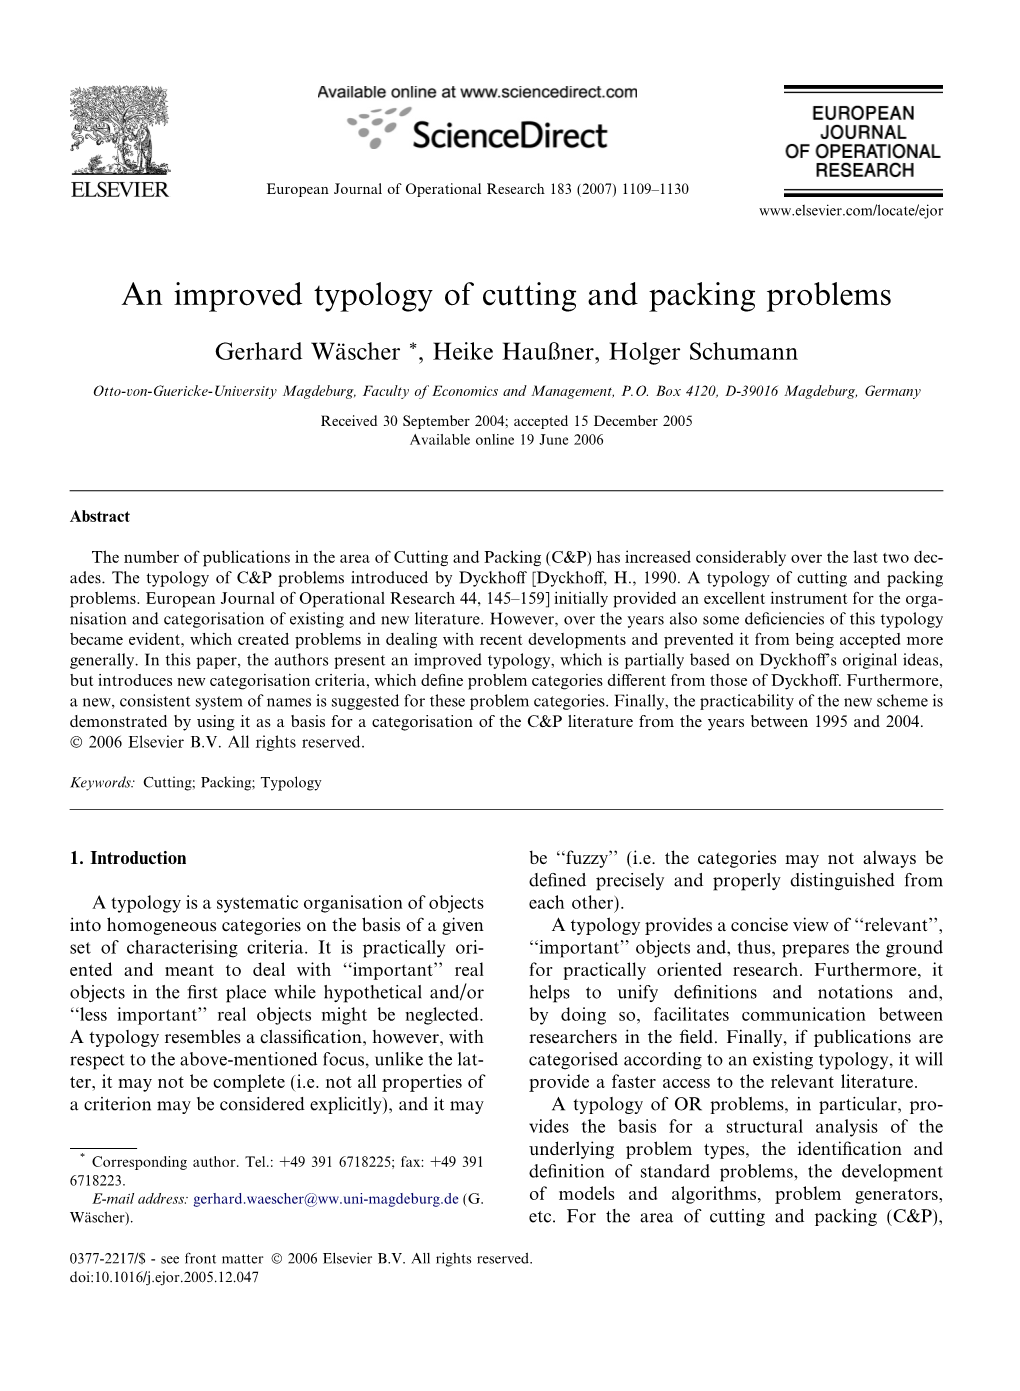 An Improved Typology of Cutting and Packing Problems